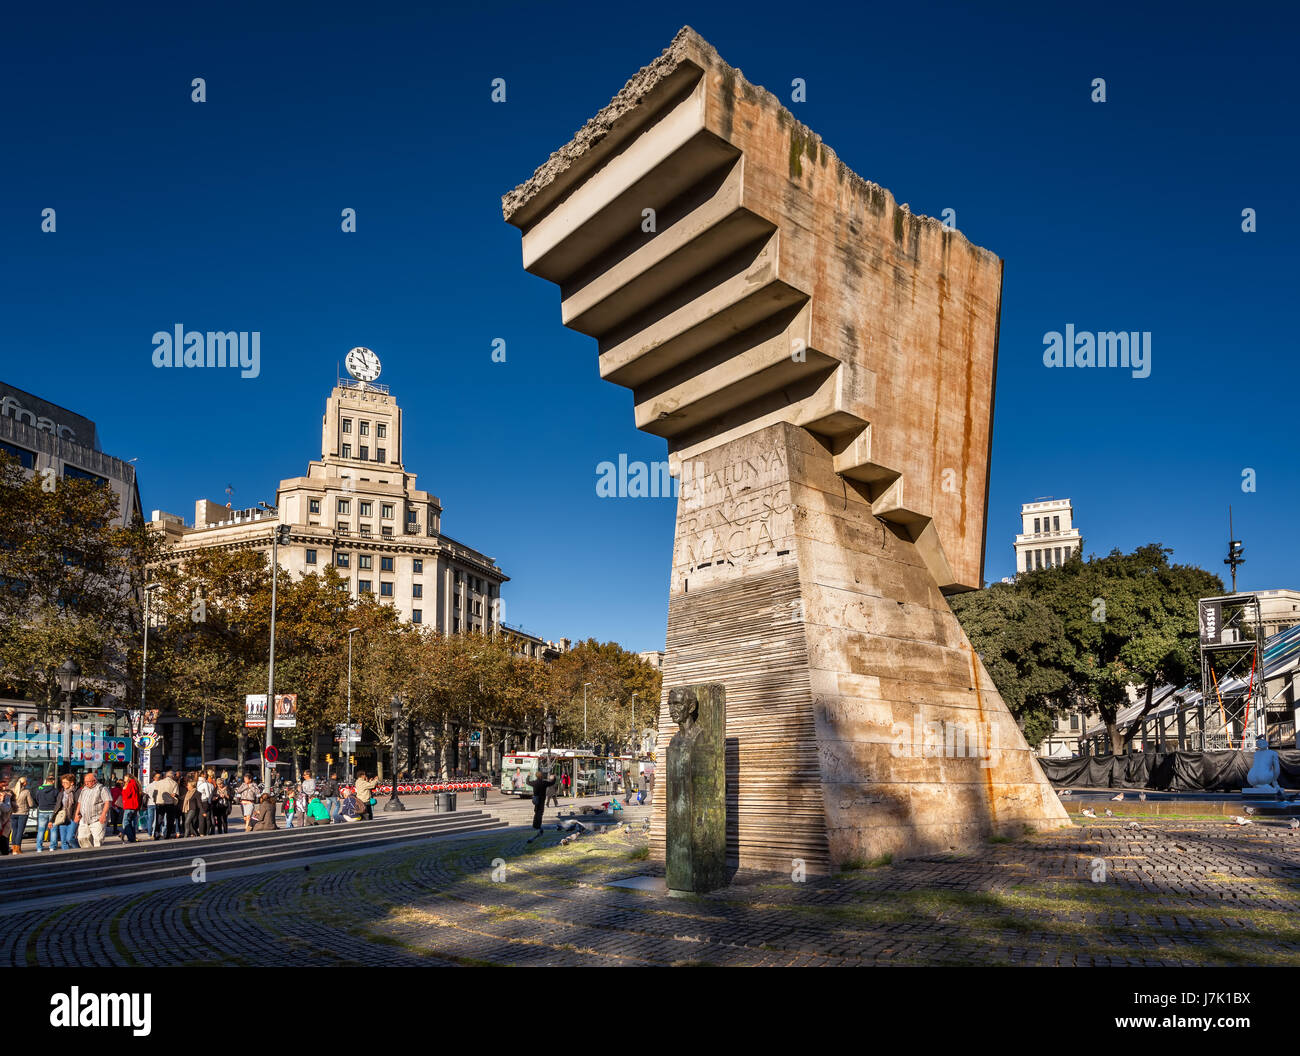 BARCELONA, SPAIN - NOVEMBER 15, 2014: Monument to Francesc Macia on the Placa de Catalnya (Catalonia Square). The square occupies an area of about 50, Stock Photo